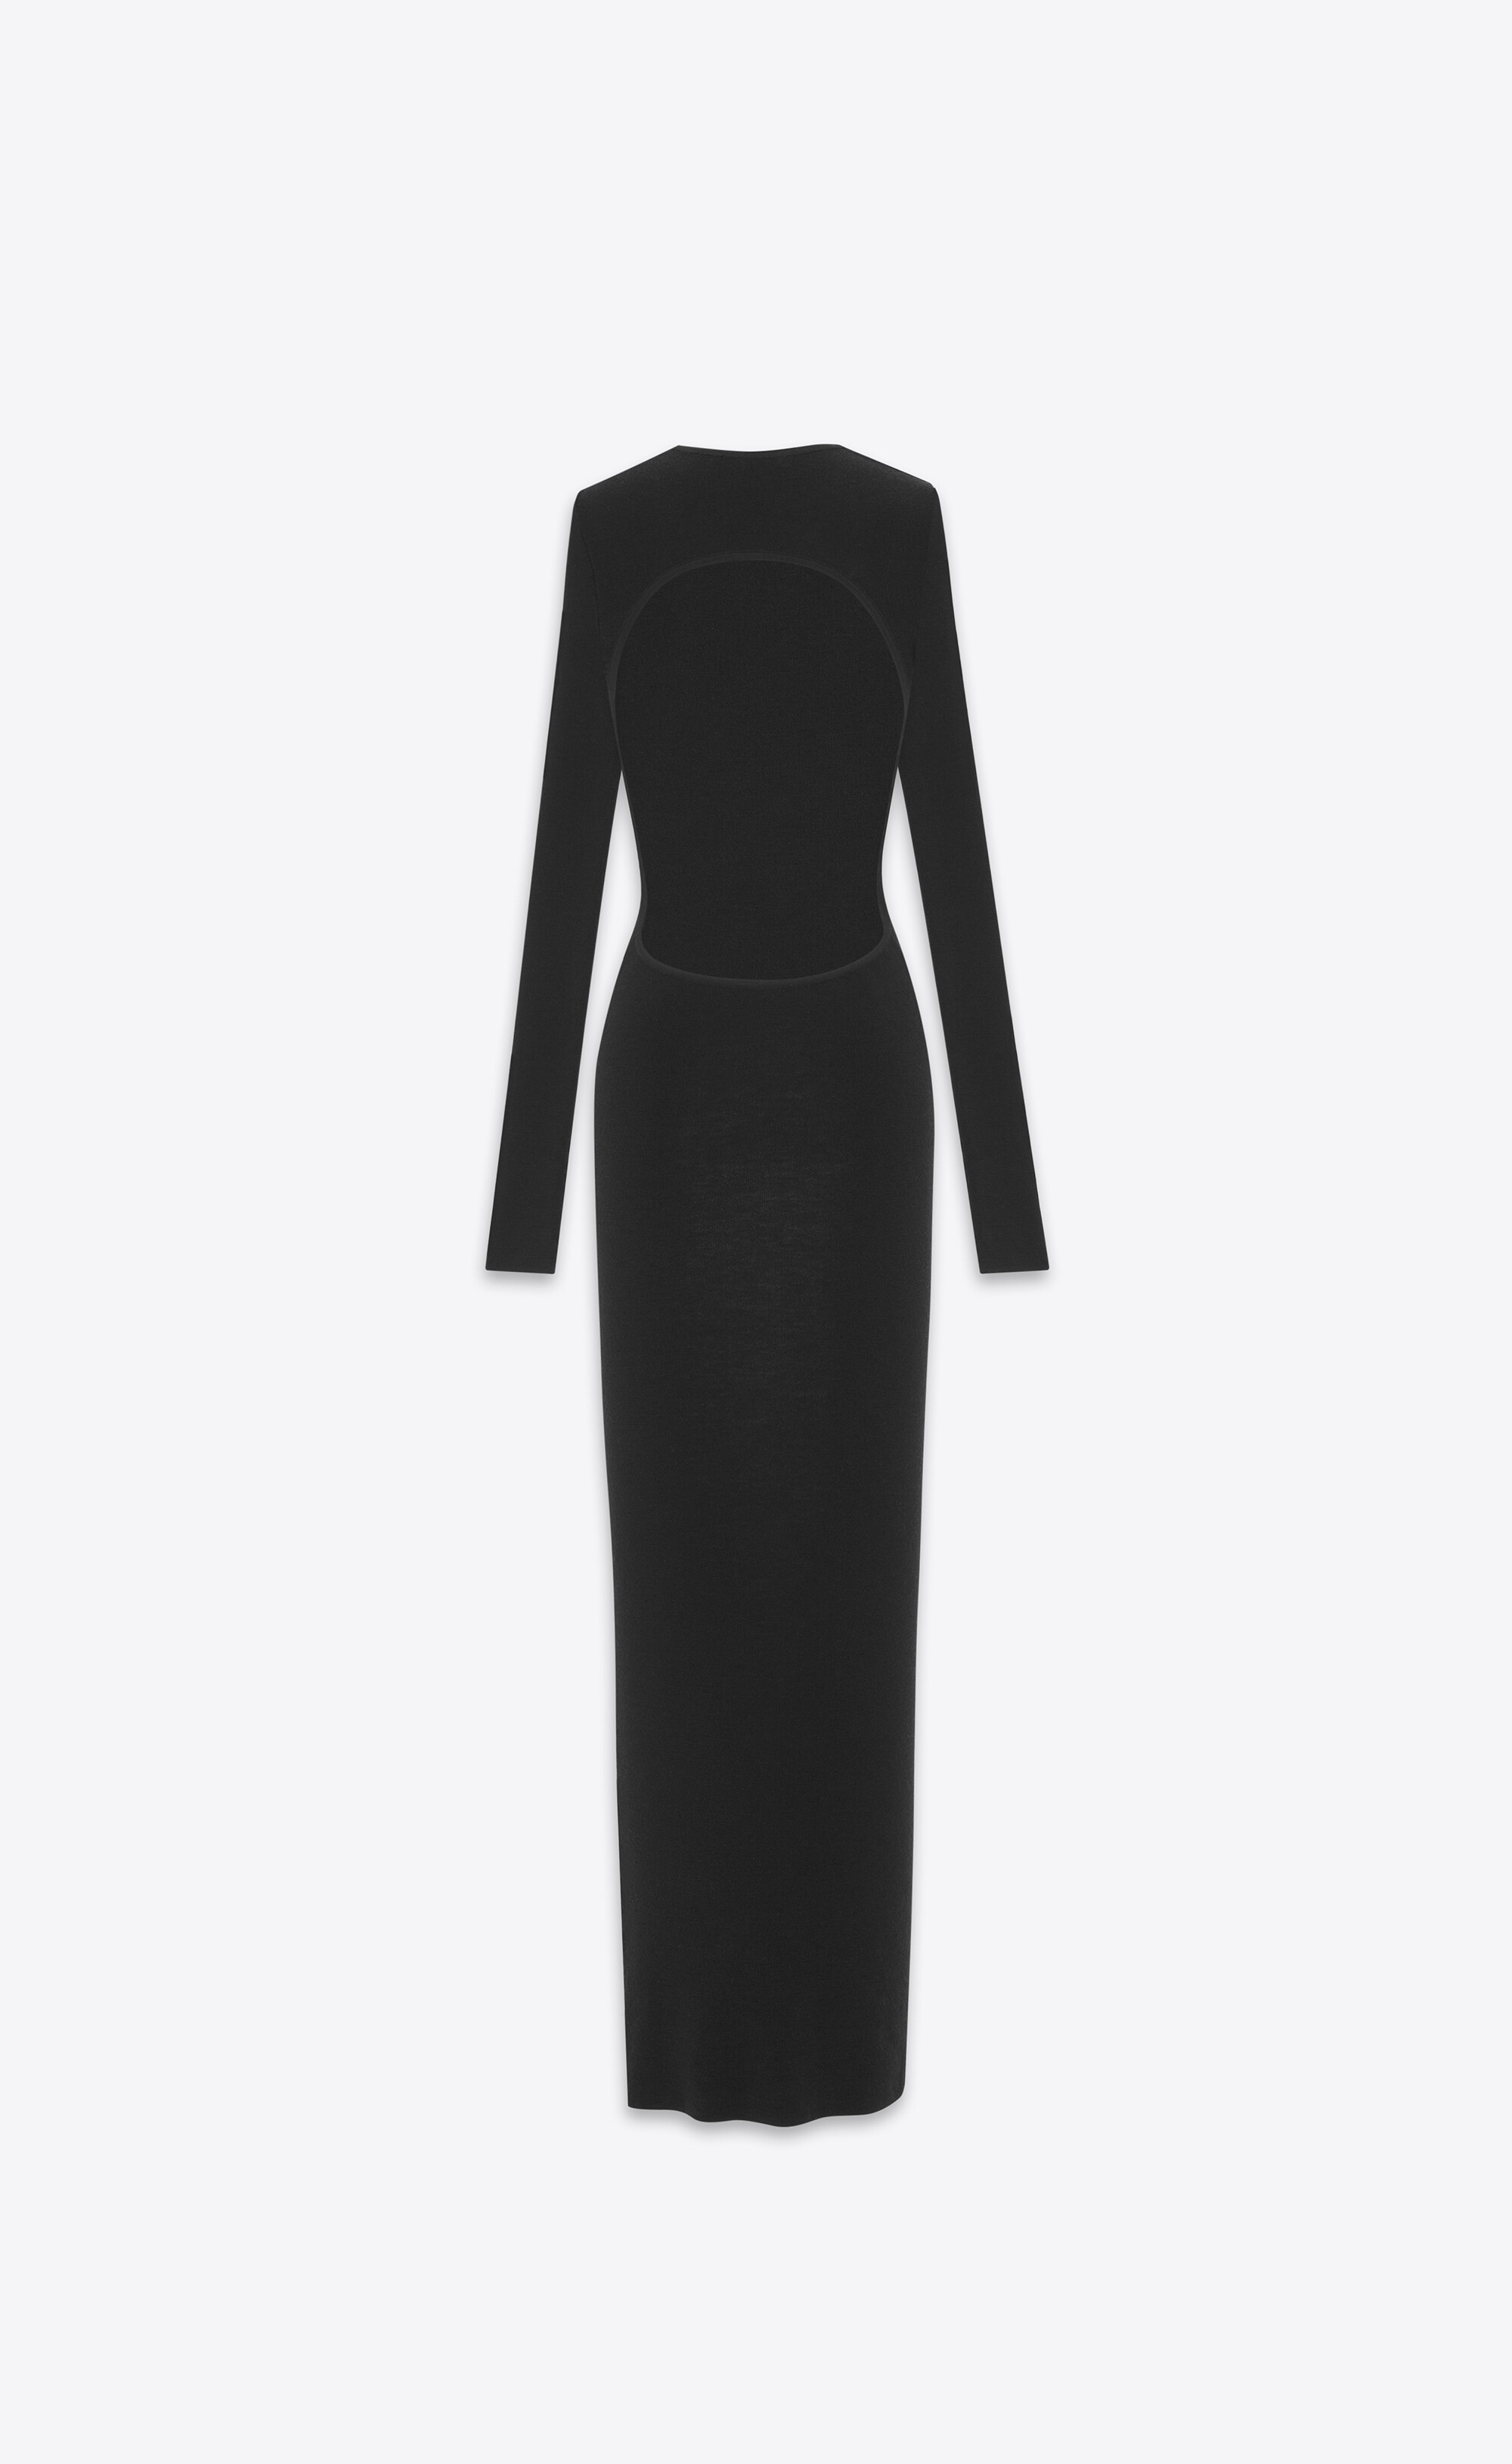 open-back dress in cashmere, wool and silk - 2